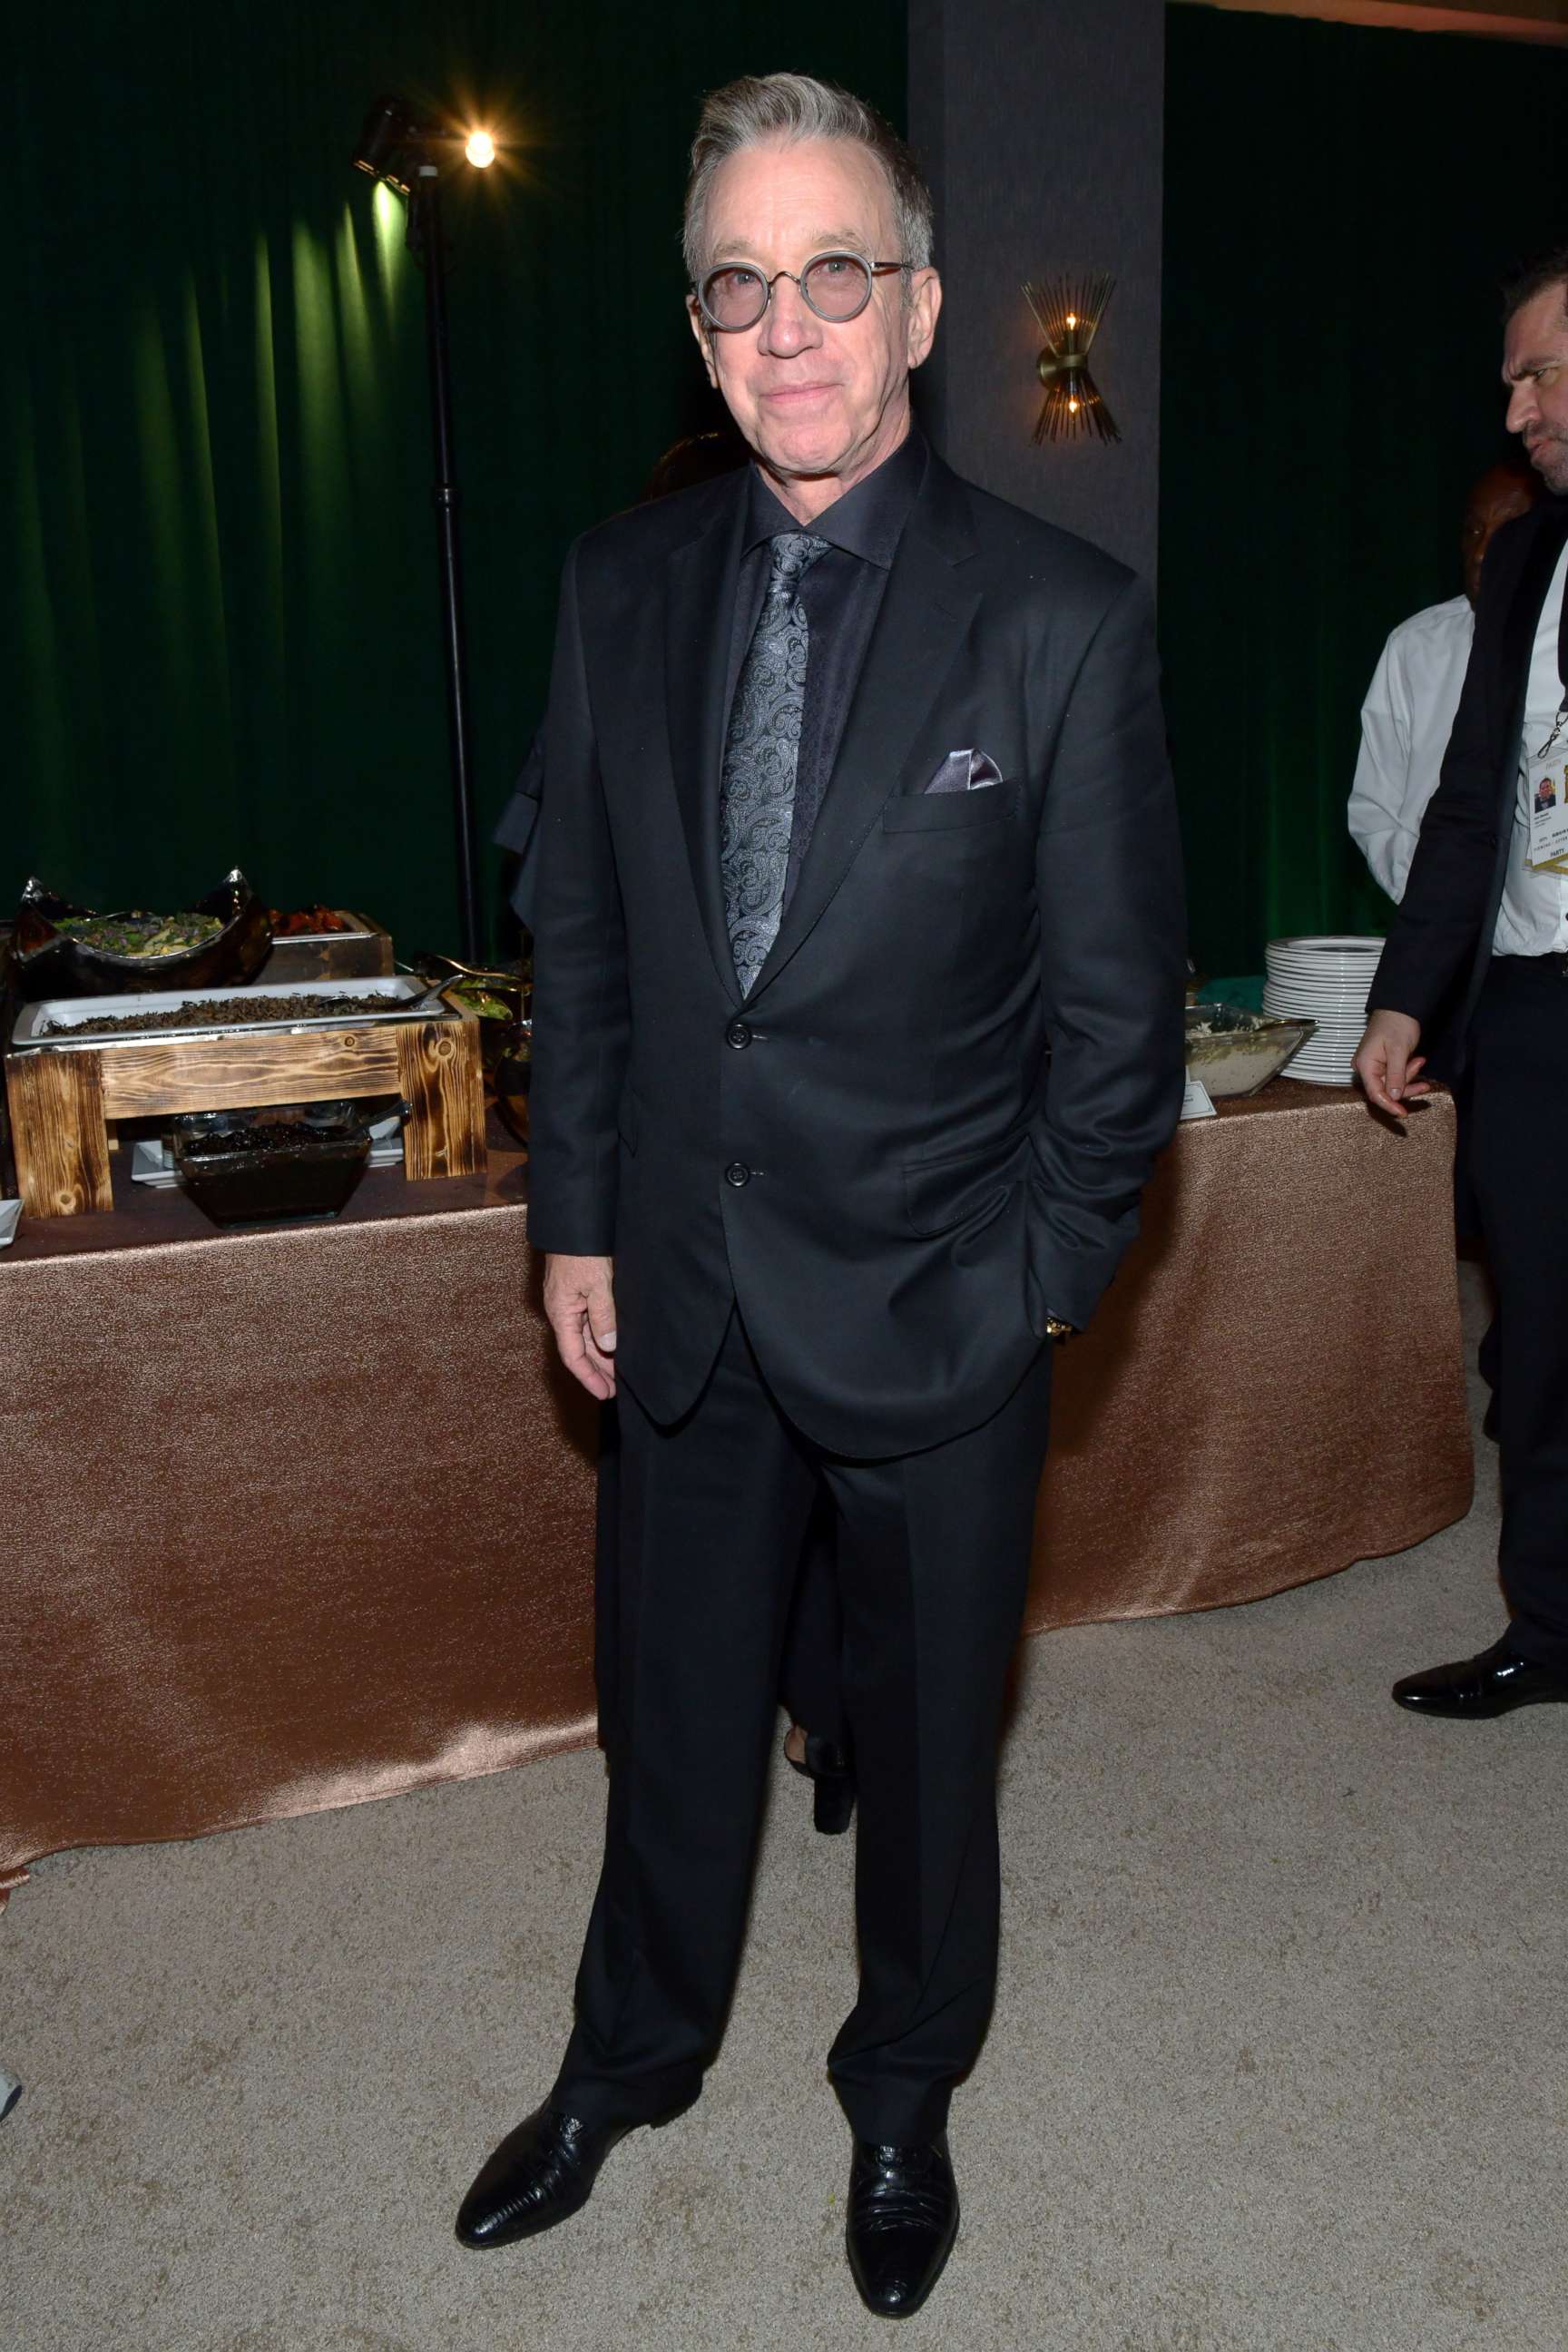 PHOTO: Tim Allen attends an event at The Beverly Hilton Hotel on Jan. 5, 2020 in Beverly Hills, Calif.